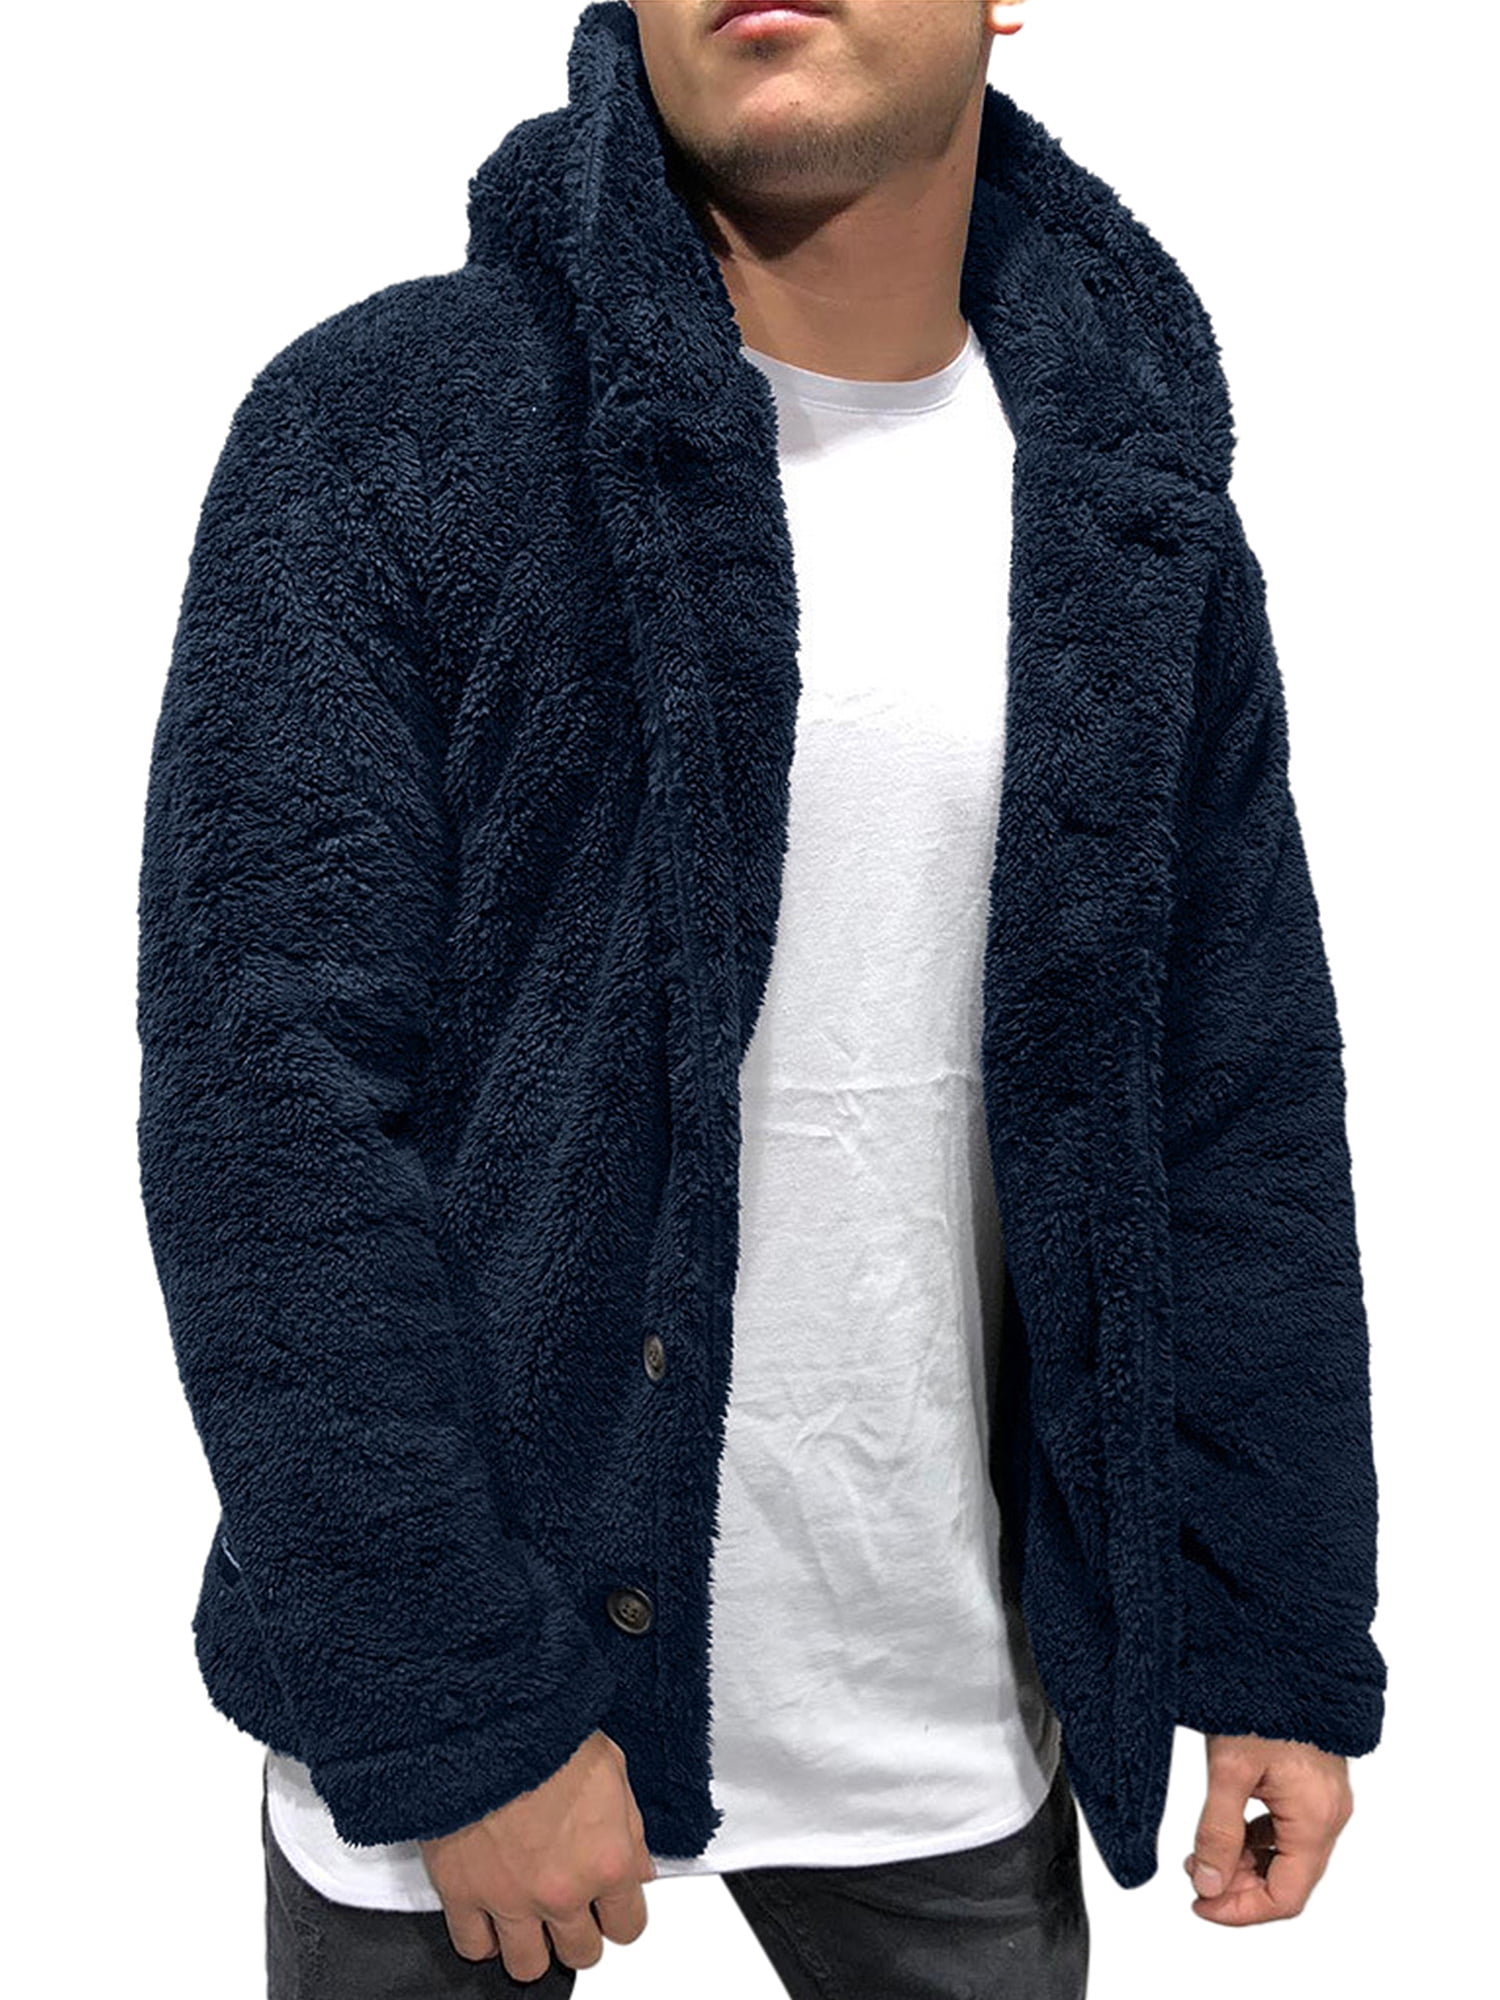 Nicetage Mens Fuzzy Sherpa Hoodie Lightweight Jacket Open Front Cardigans Coat with Pockets